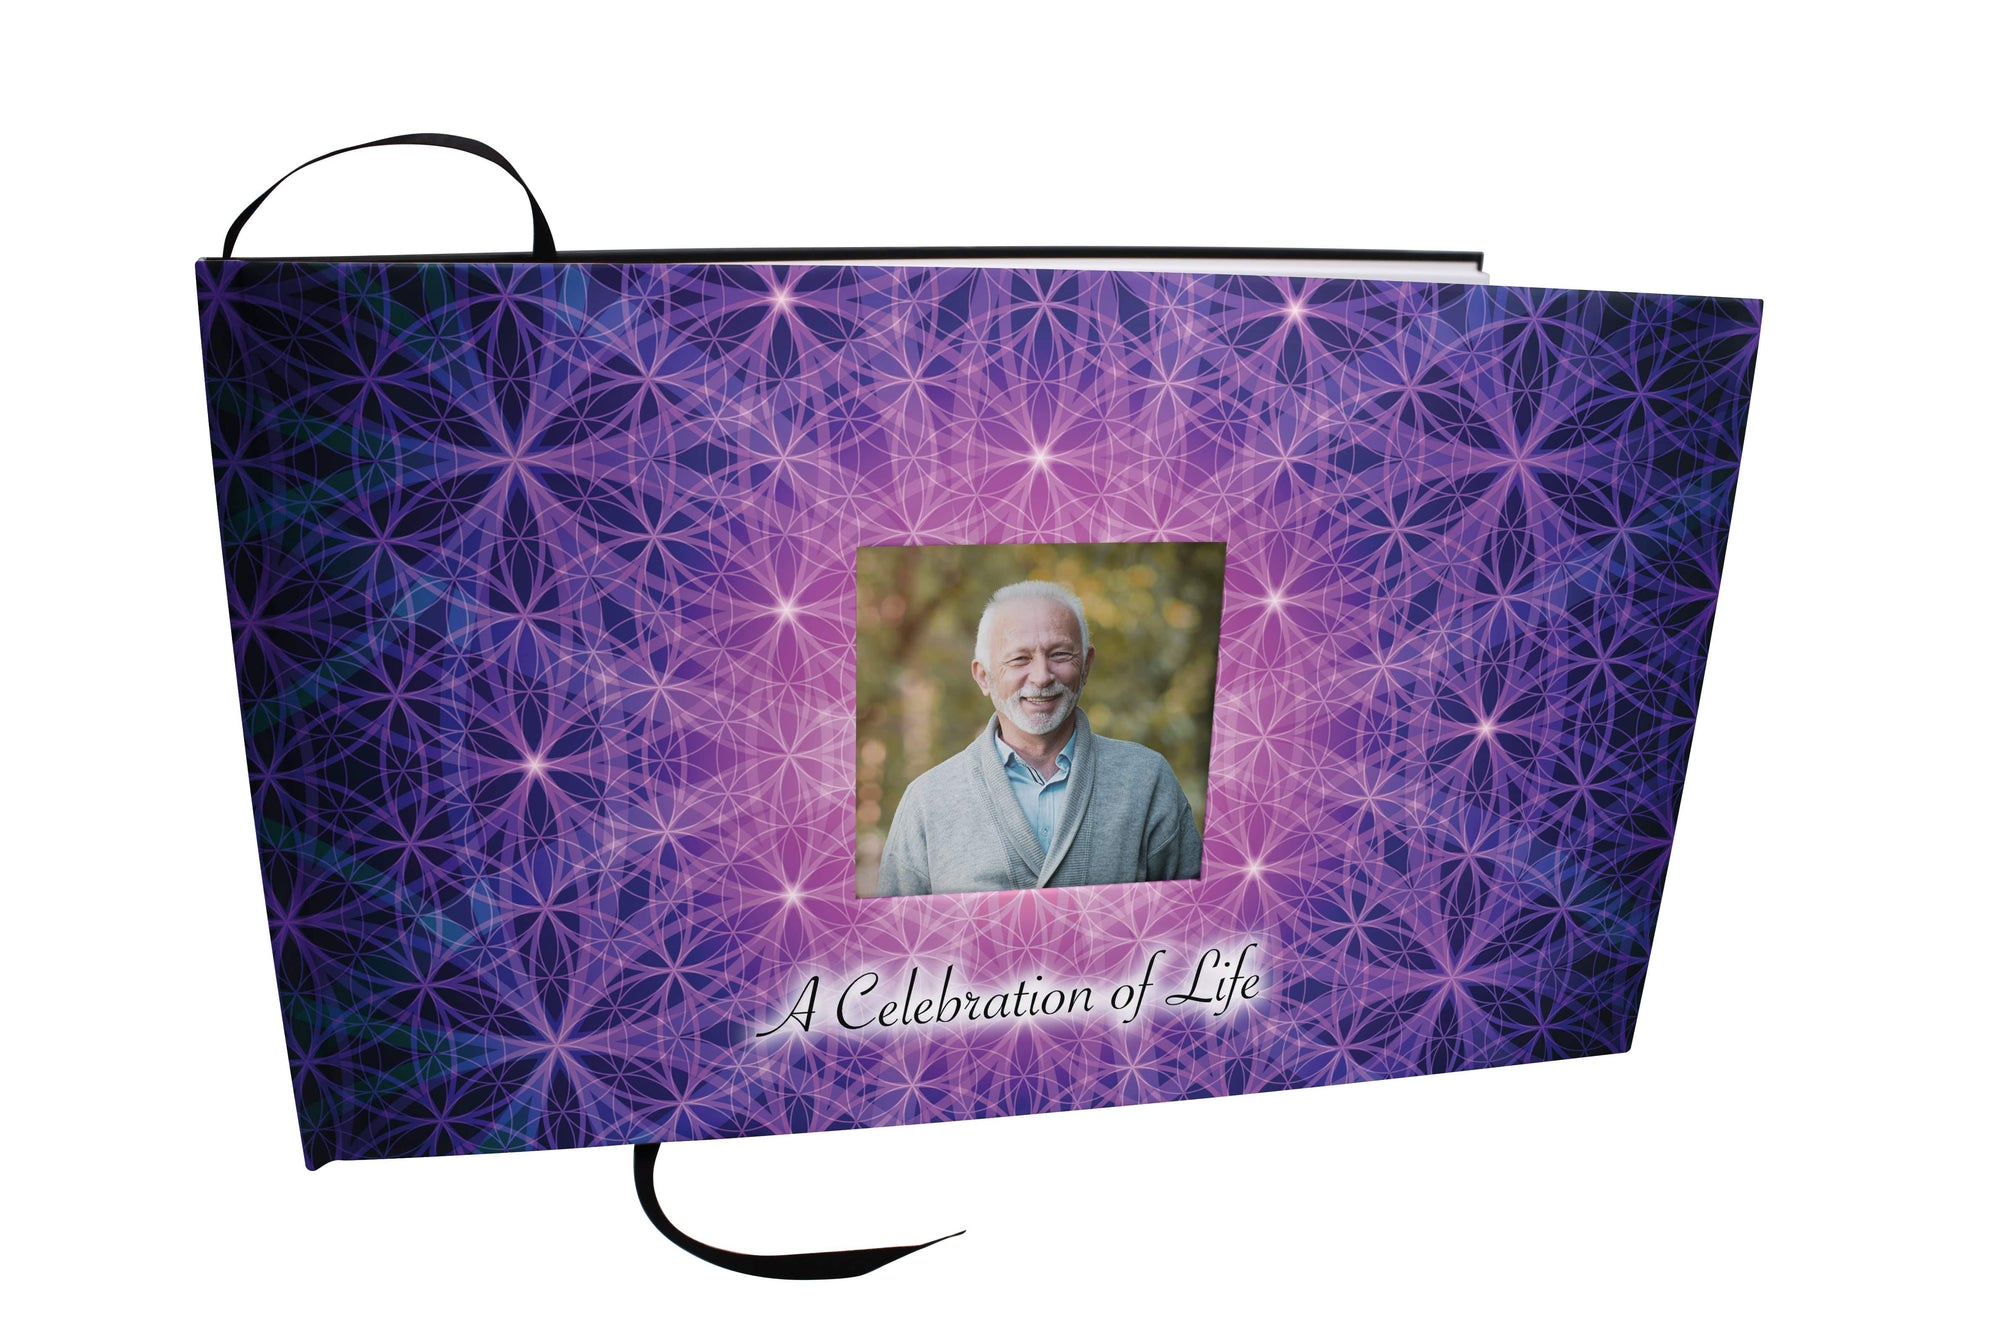 Commemorative Cremation Urns Seed of Life Matching Themed 'Celebration of Life' Guest Book for Funeral or Memorial Service